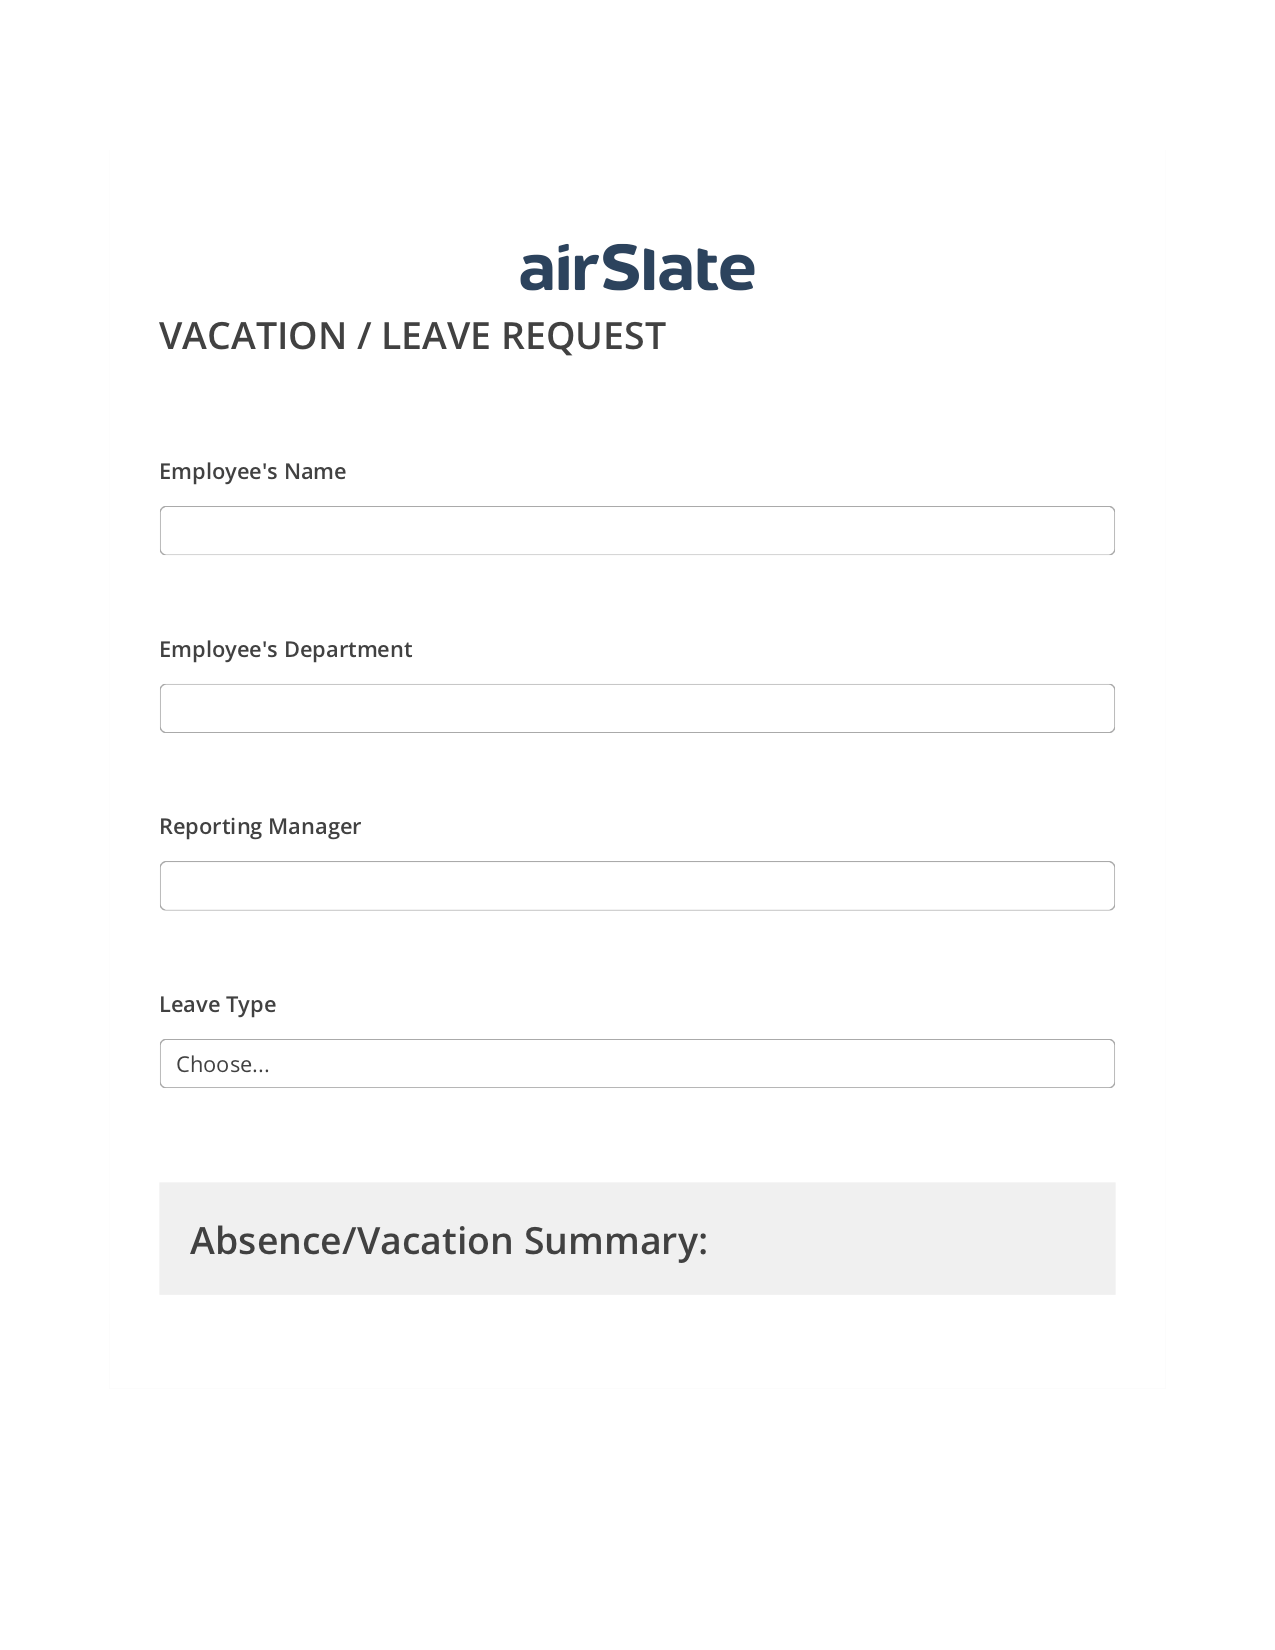 Vacation/Leave Request Workflow Pre-fill Document Bot, Invoke Salesforce Process Bot, Archive to Dropbox Bot